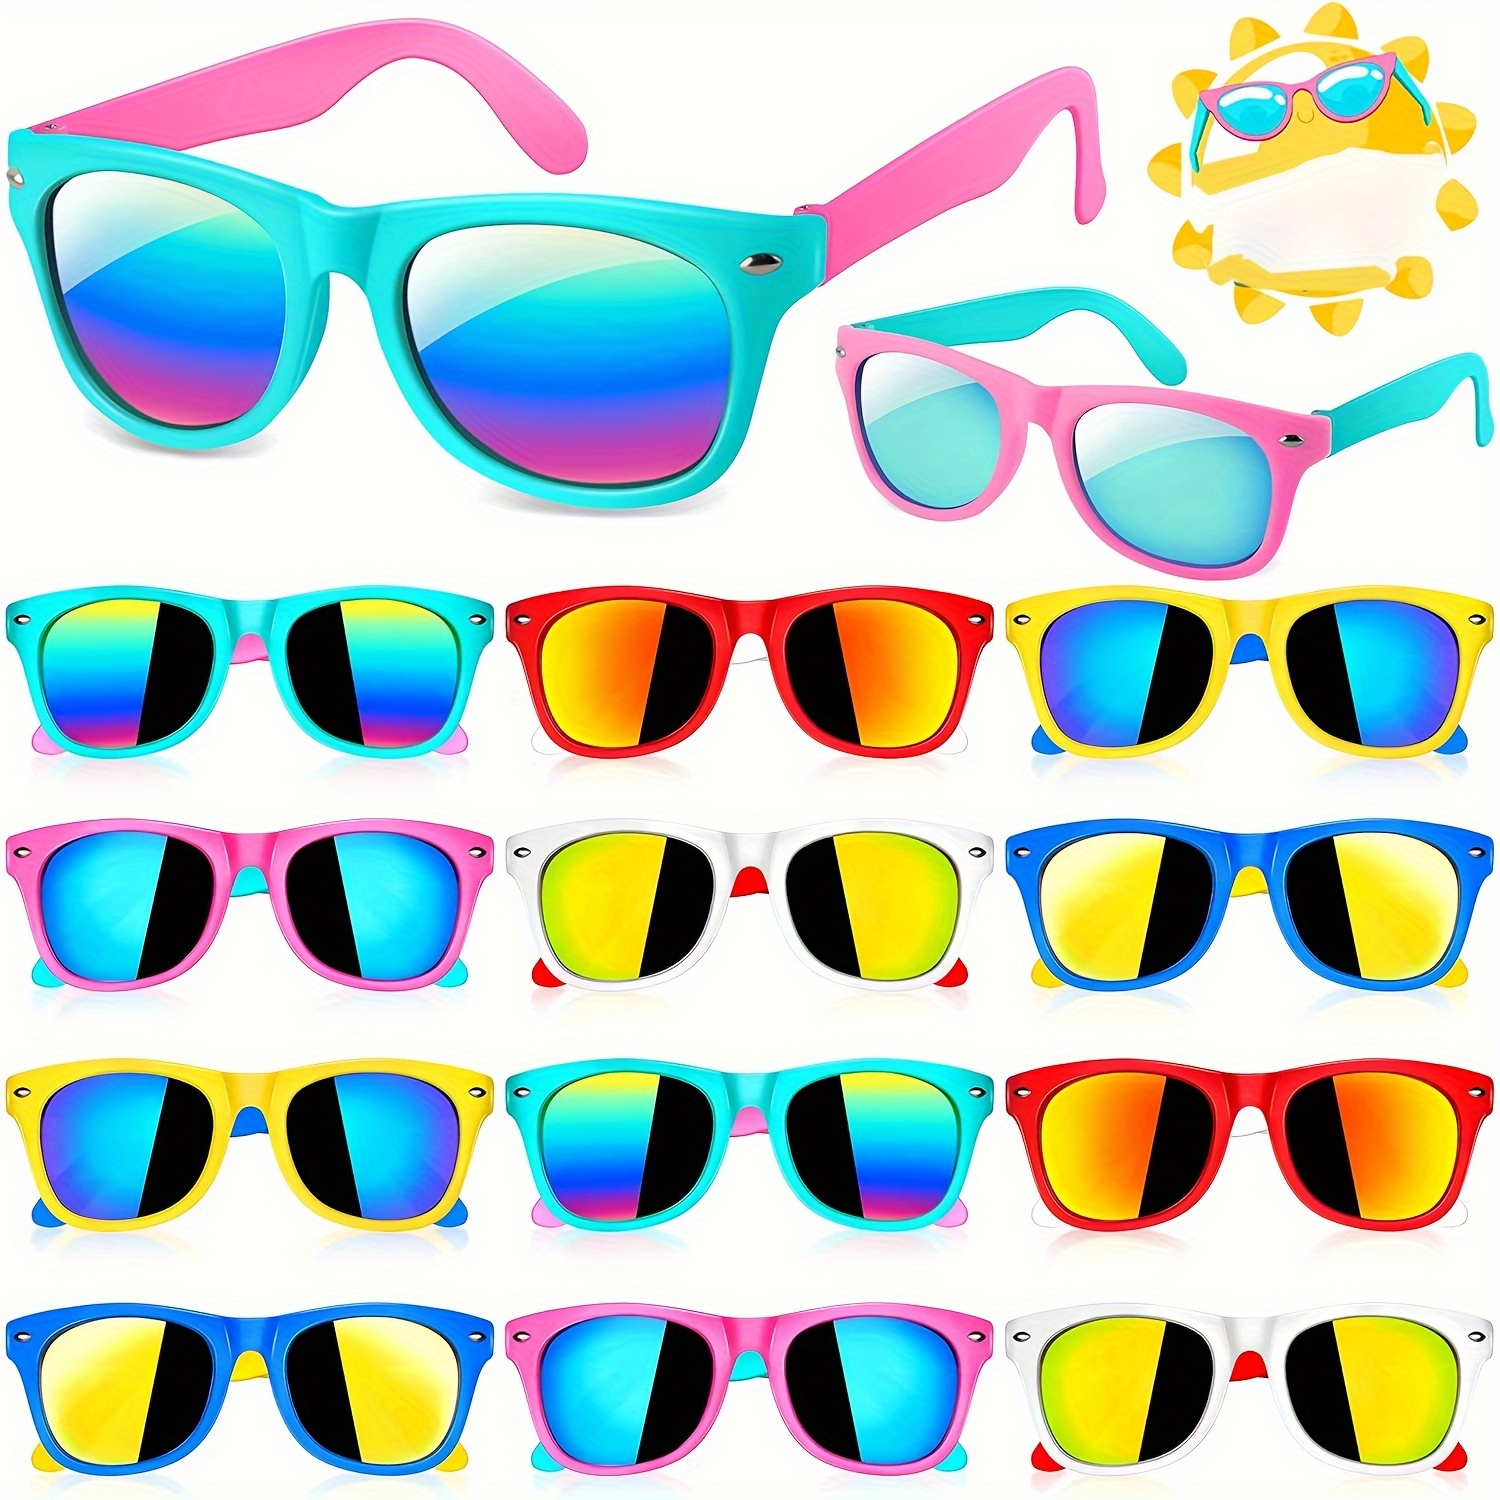 

24pairs, Y2k Cool Fantasy Classic Fashion Glasses, Color Matching Style, For Boys Girls Outdoor Sports Party Vacation Travel Supplies Photo Props